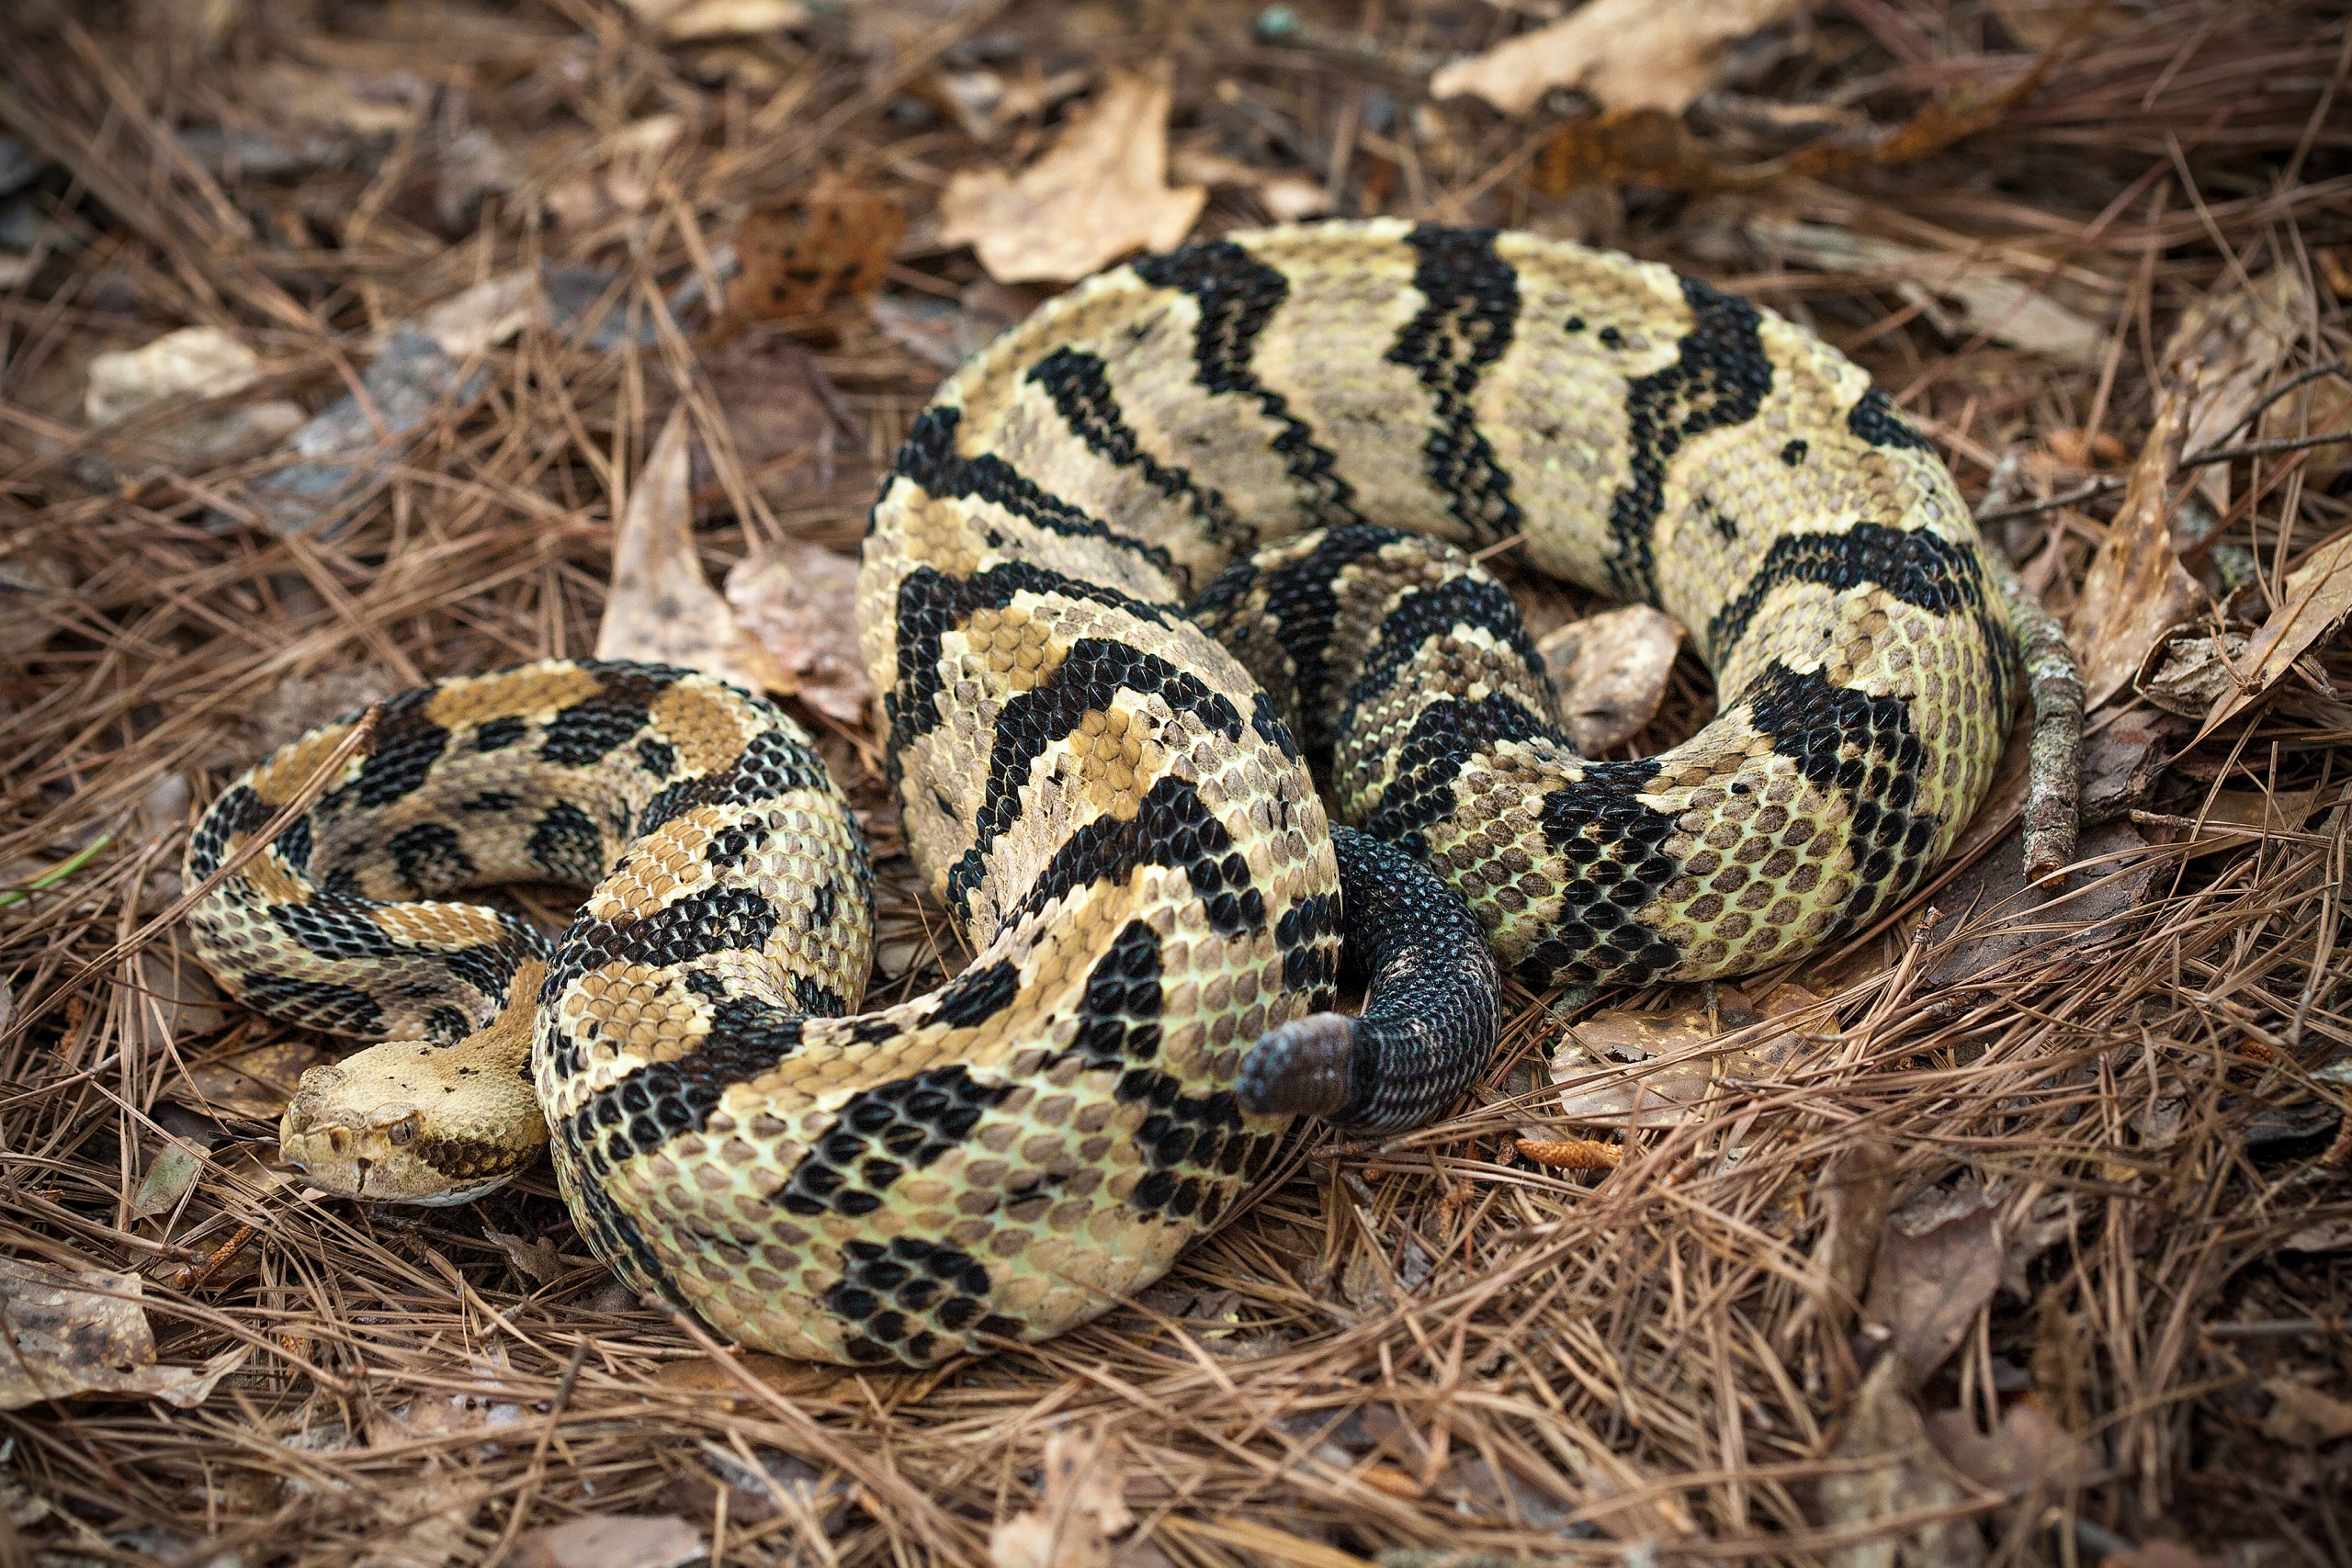 Canebrake rattlesnakes, better known as timber rattlesnakes, usually ambush their prey with a quick strike of their lethal venom. 